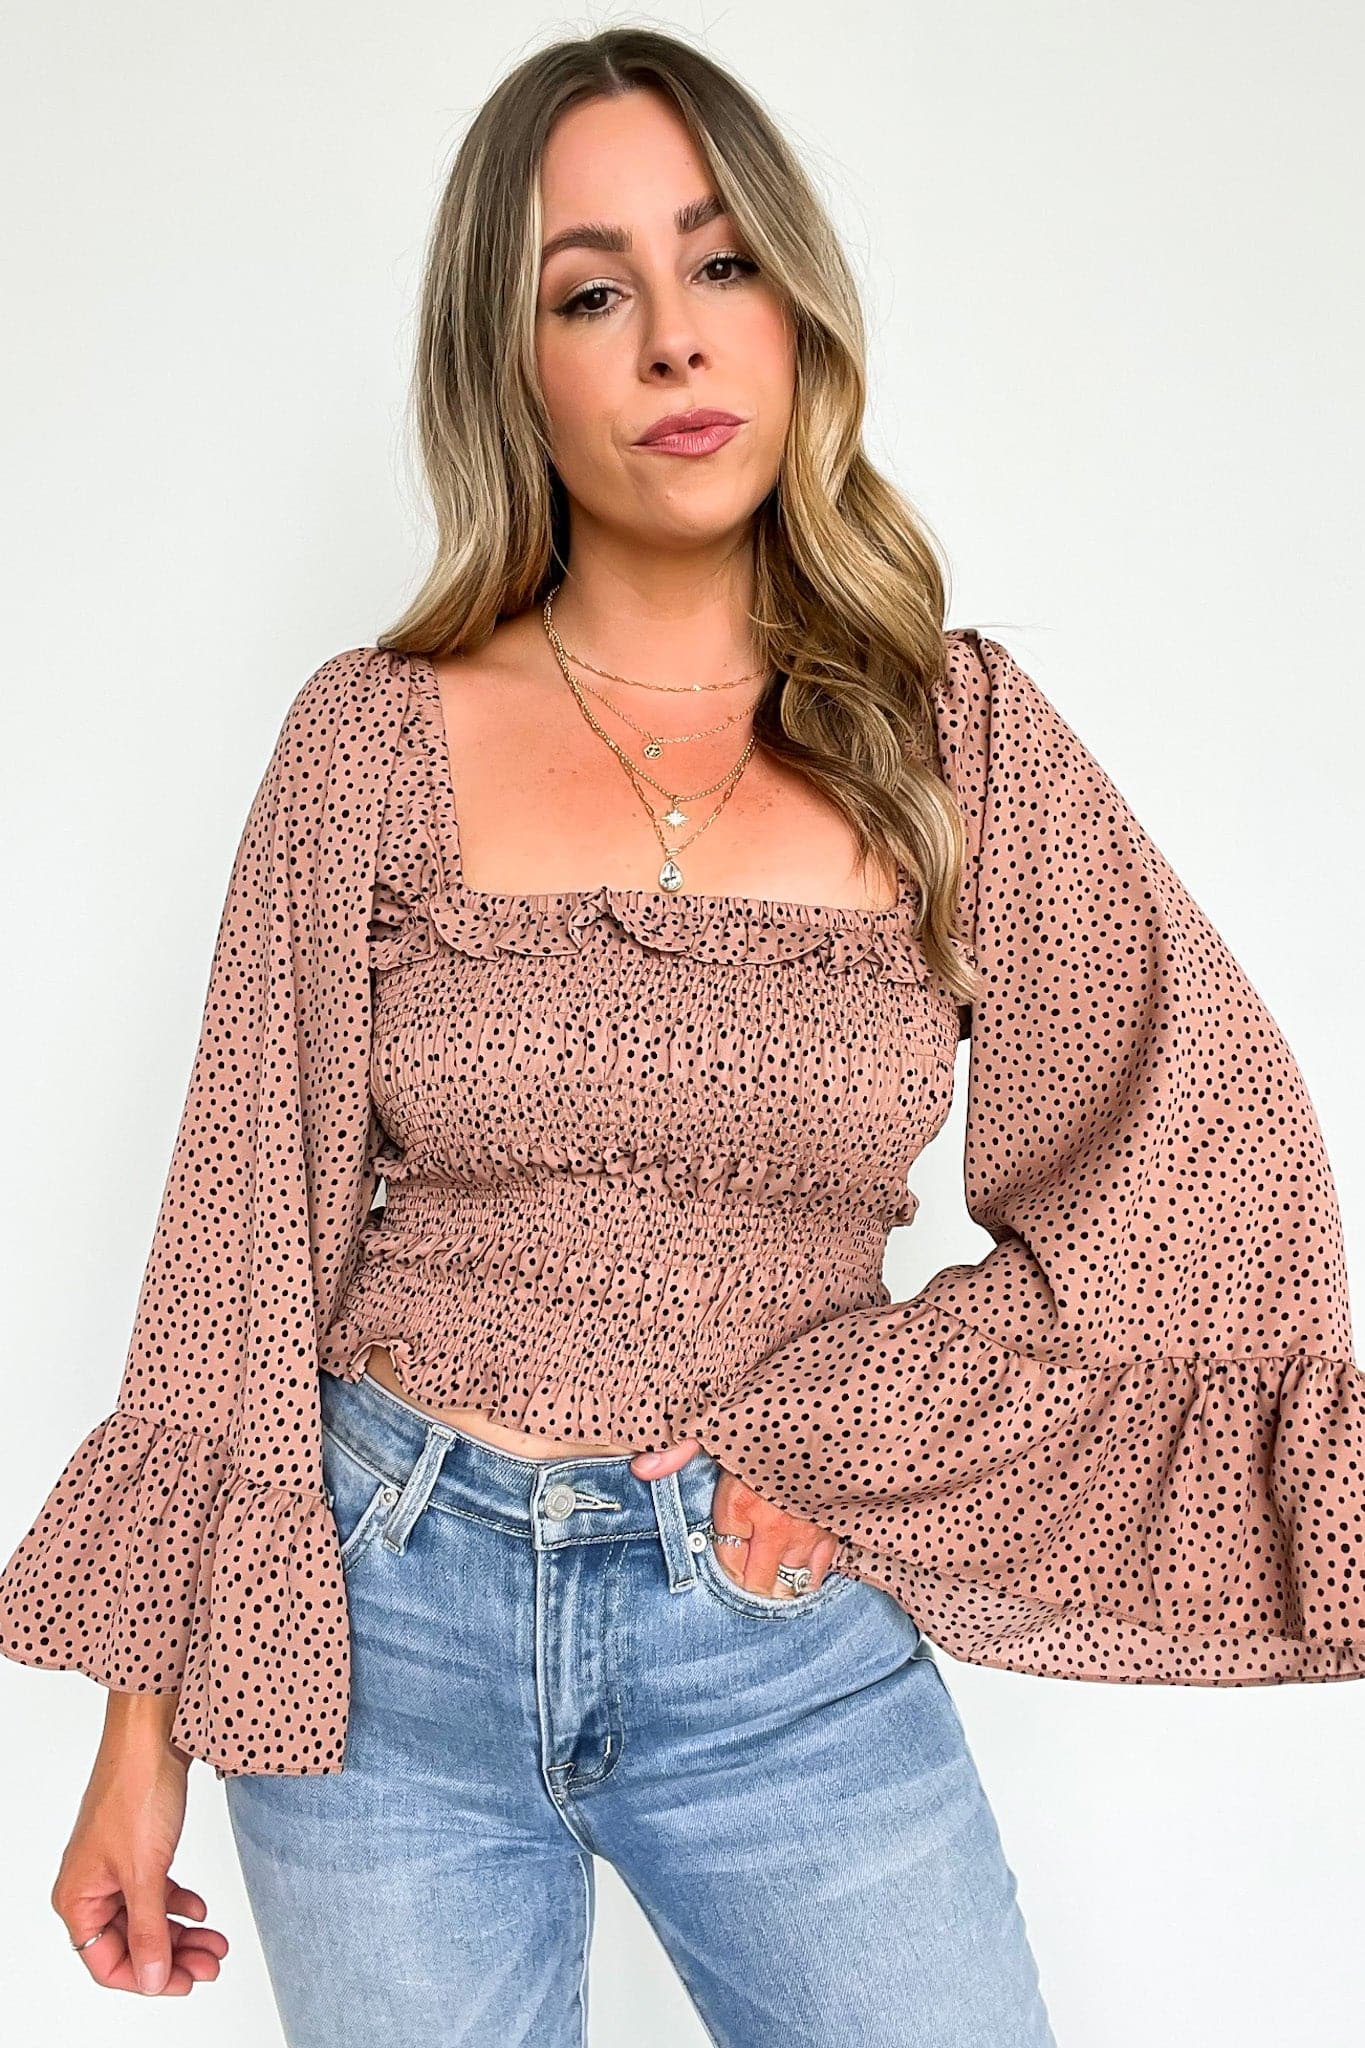  Refined Eloquence Dot Print Smocked Top - FINAL SALE - Madison and Mallory